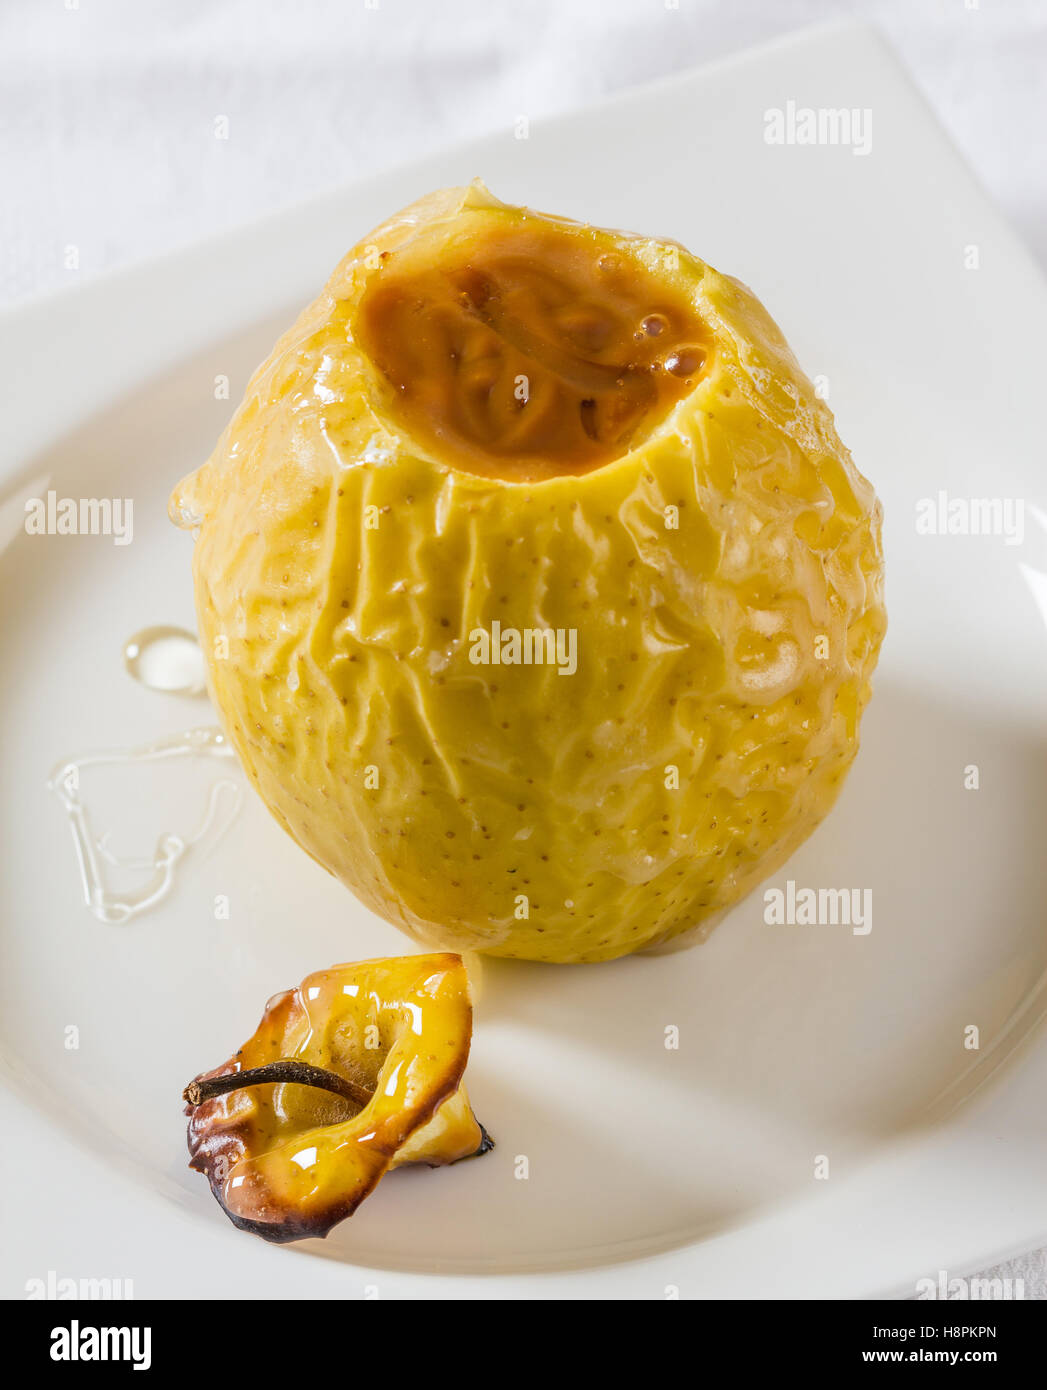 Oven baked apple filled with dulce de leche, a speciality from Argentina. Stock Photo